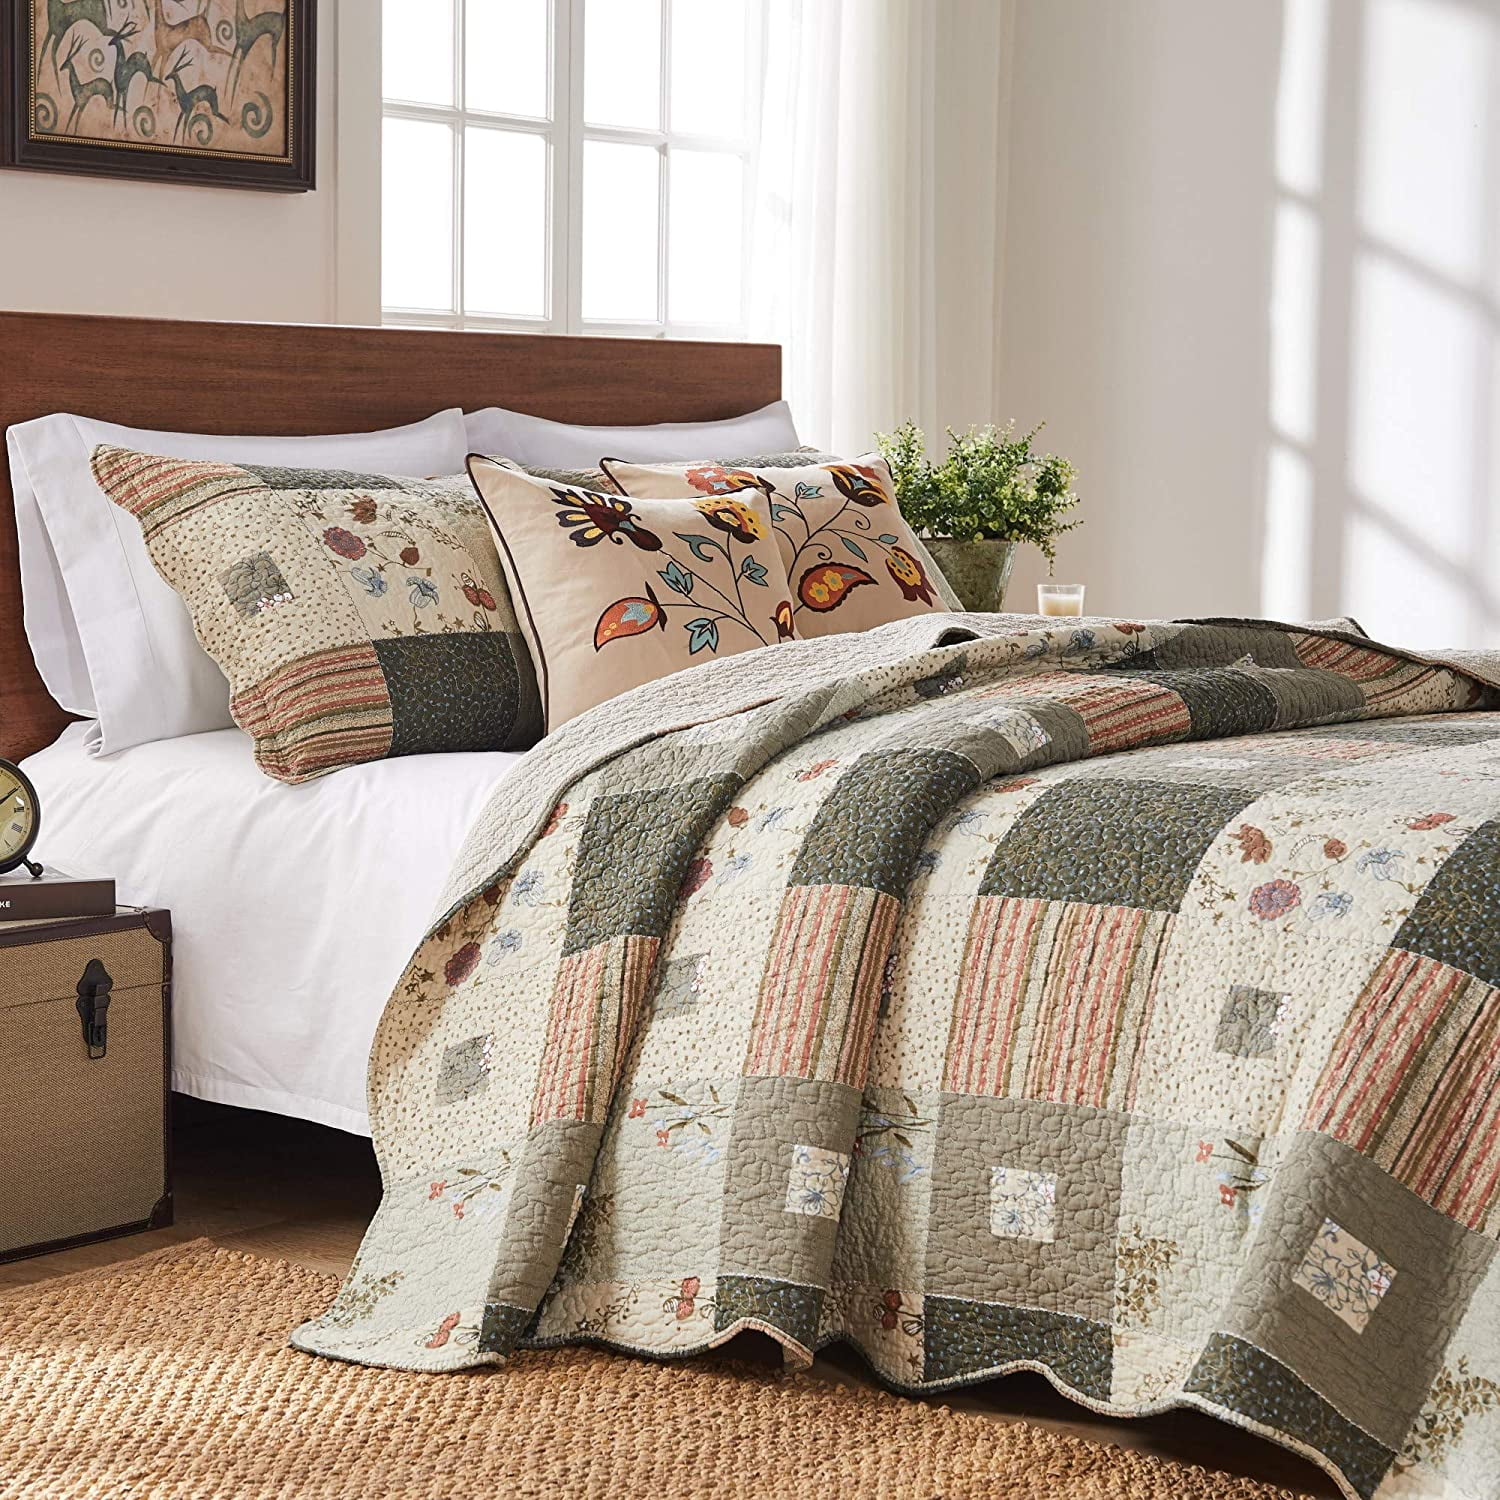 Details about   Vintage Patchwork Bedspread Hand Embroidery Bed Cover Throw Wall Hanging Curtain 